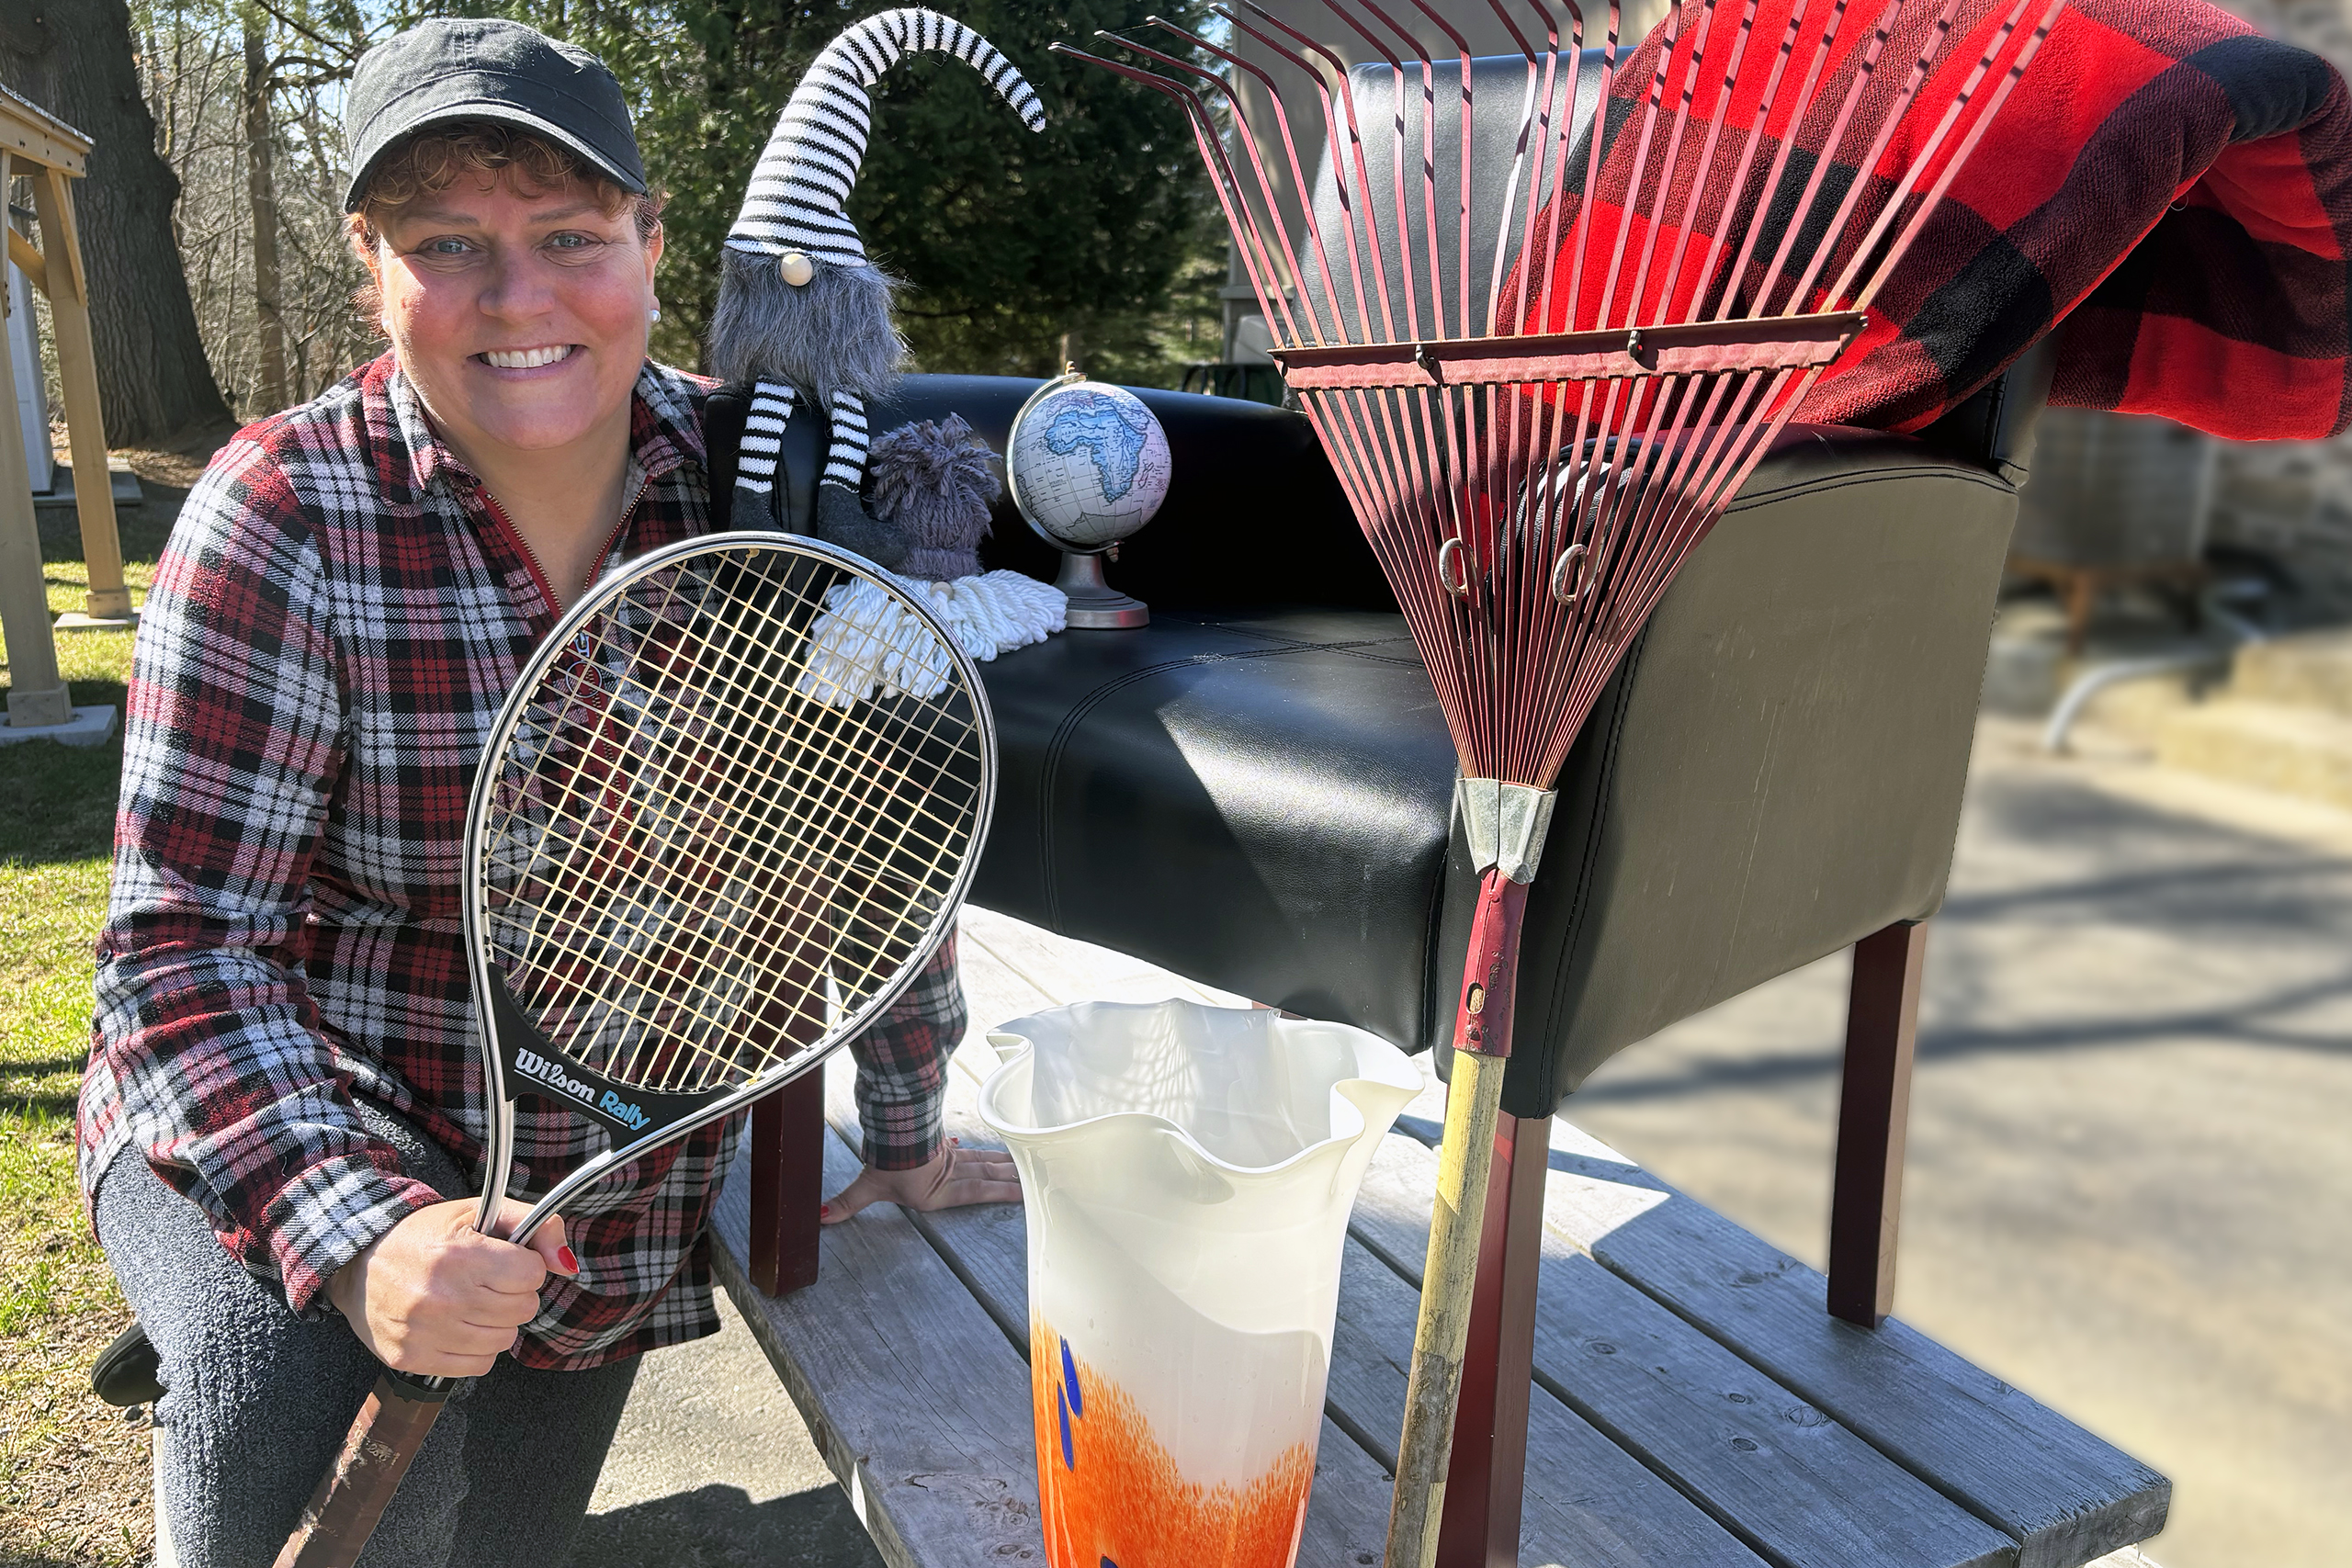 A woman in a ball cap and plaid shirt smiles while sitting outside on a picnic table with a chair, tennis racket, vase, rake and other home goods.